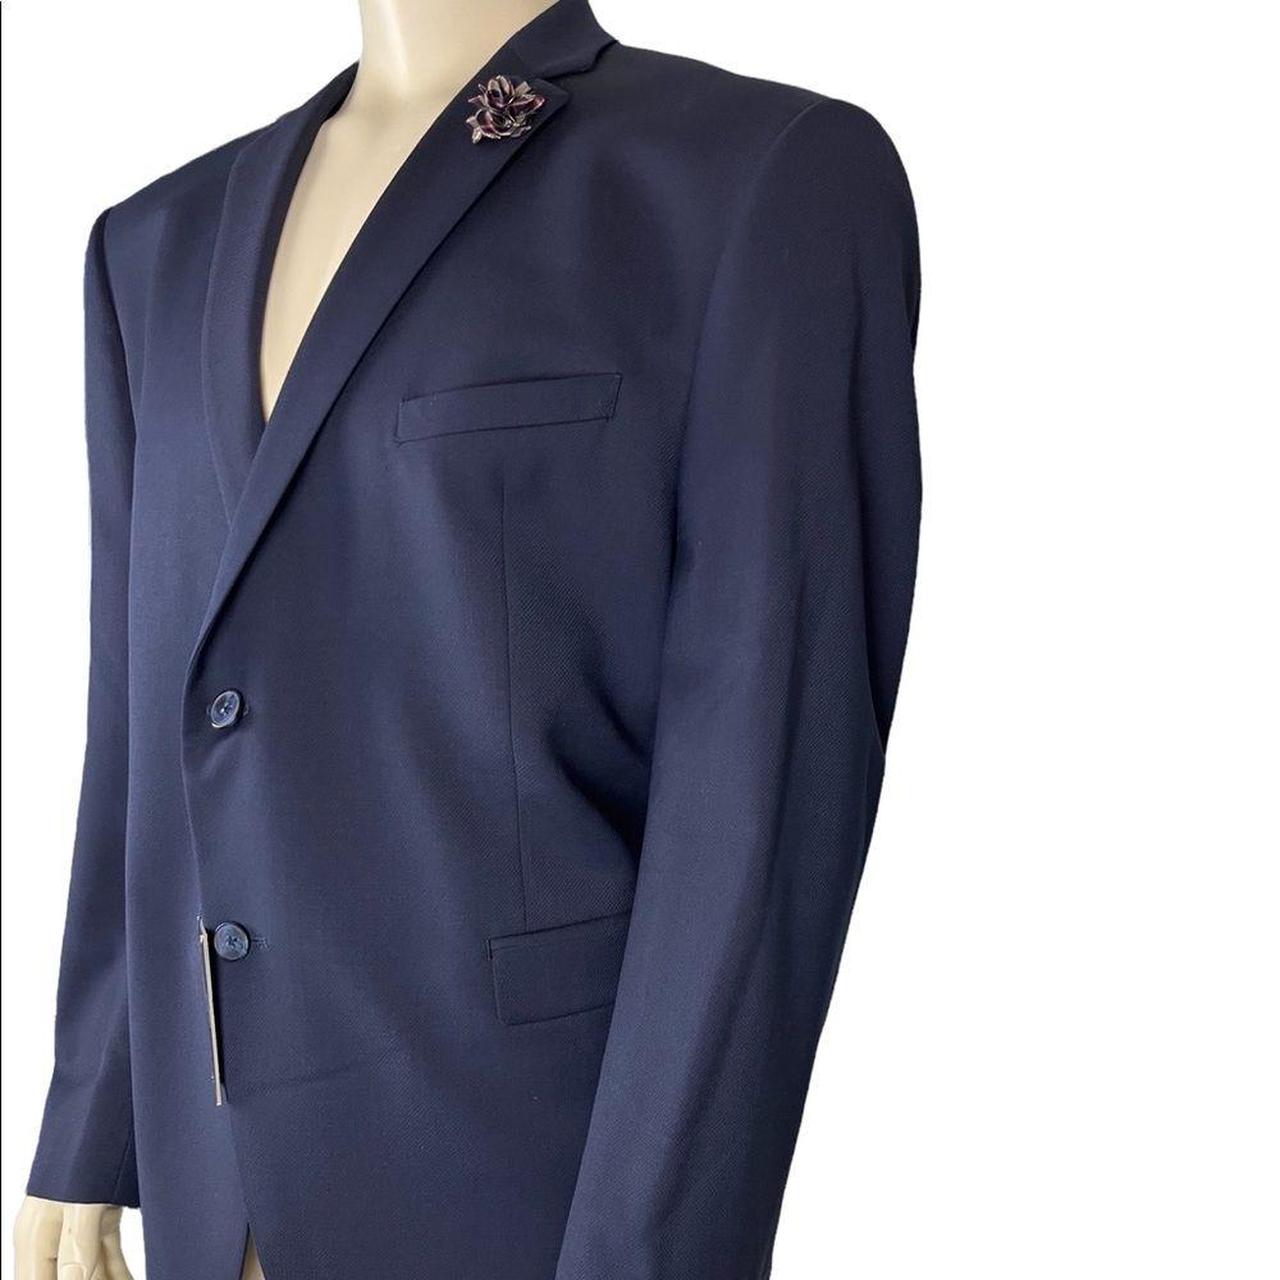 Product Image 2 - This Penguin blazer upgrades every